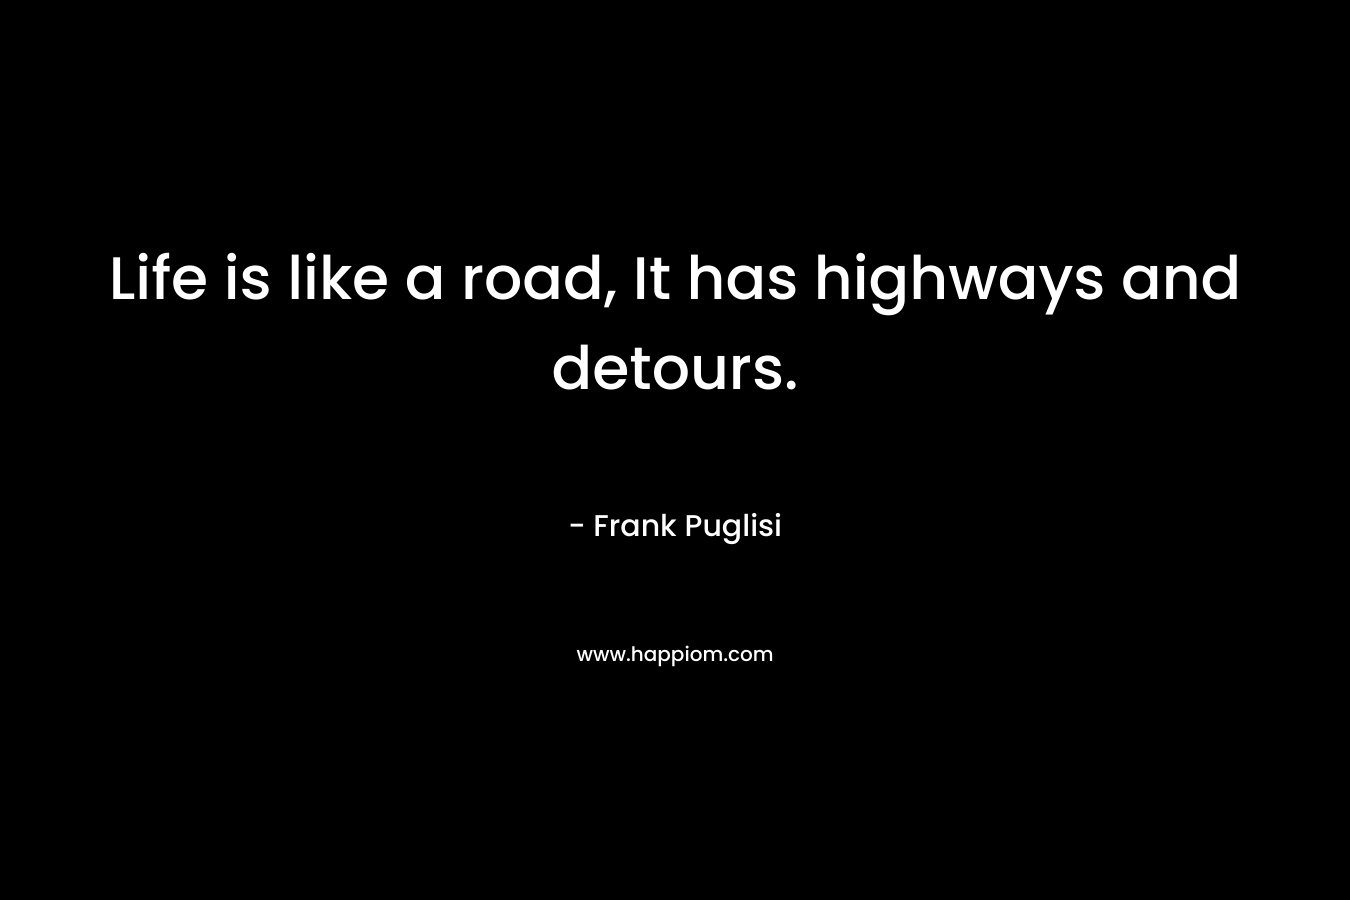 Life is like a road, It has highways and detours. – Frank Puglisi